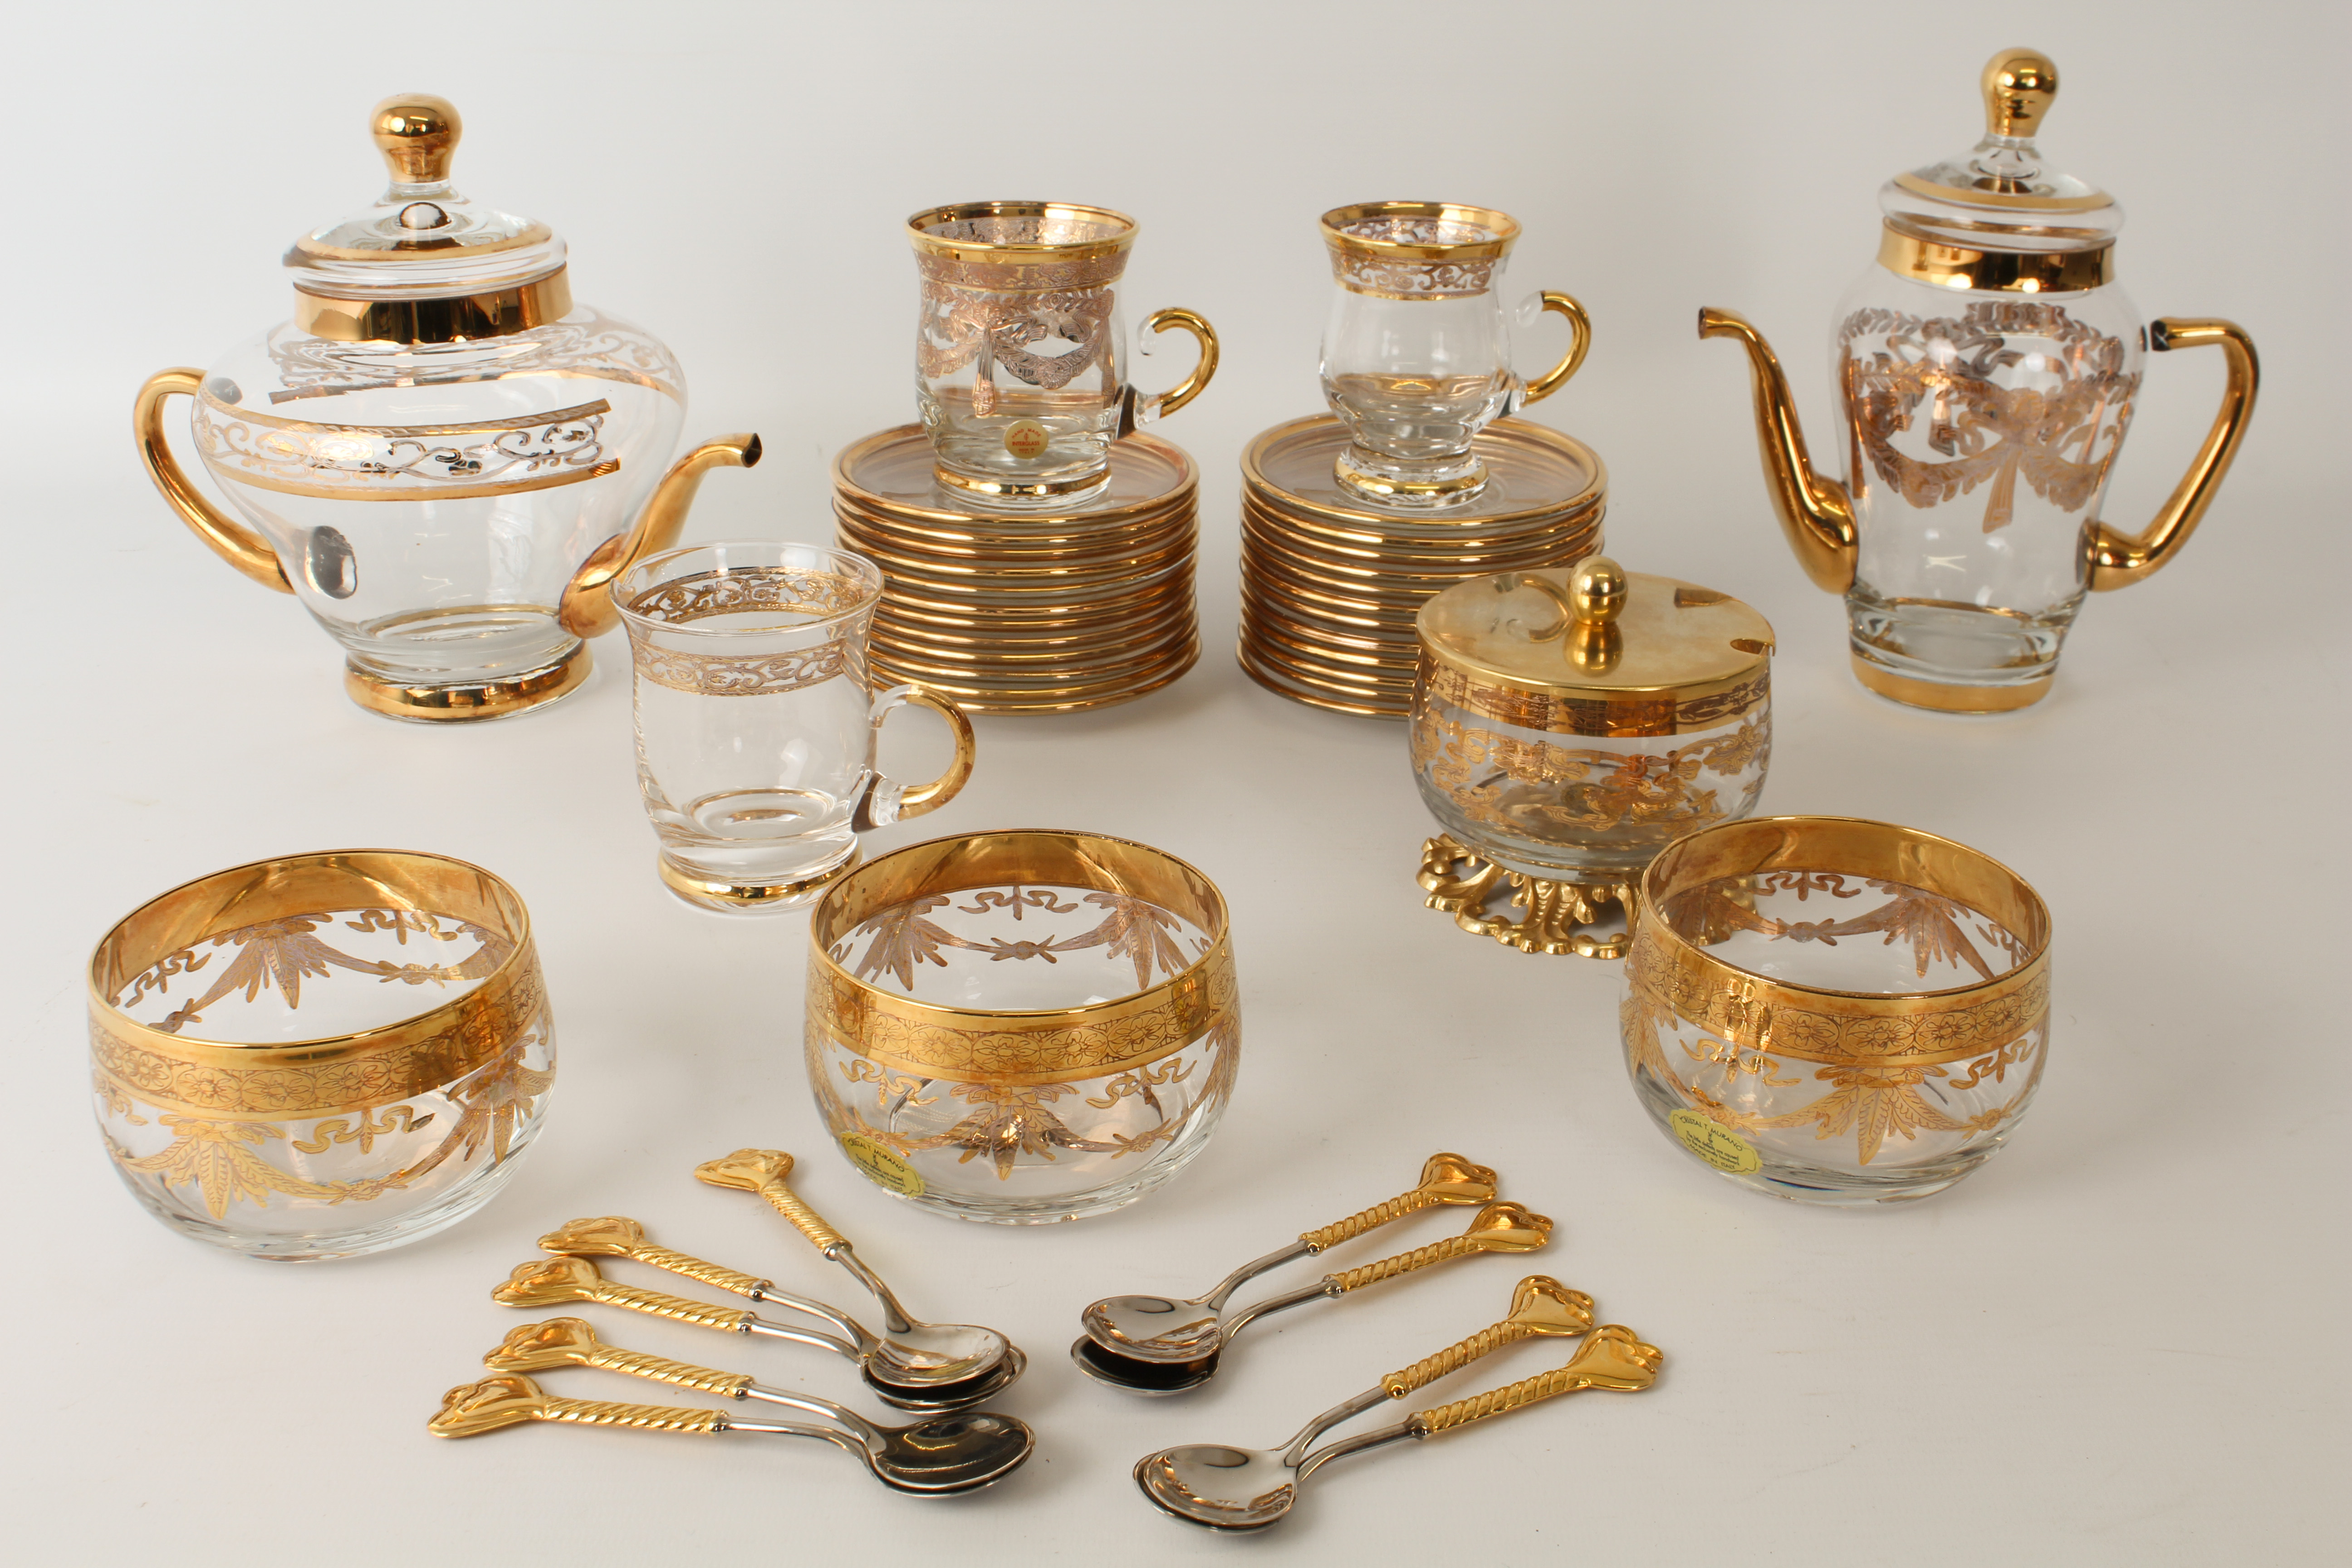 An Italian gilt-decorated glass tea and coffee service in the Florentine taste by Interglass and